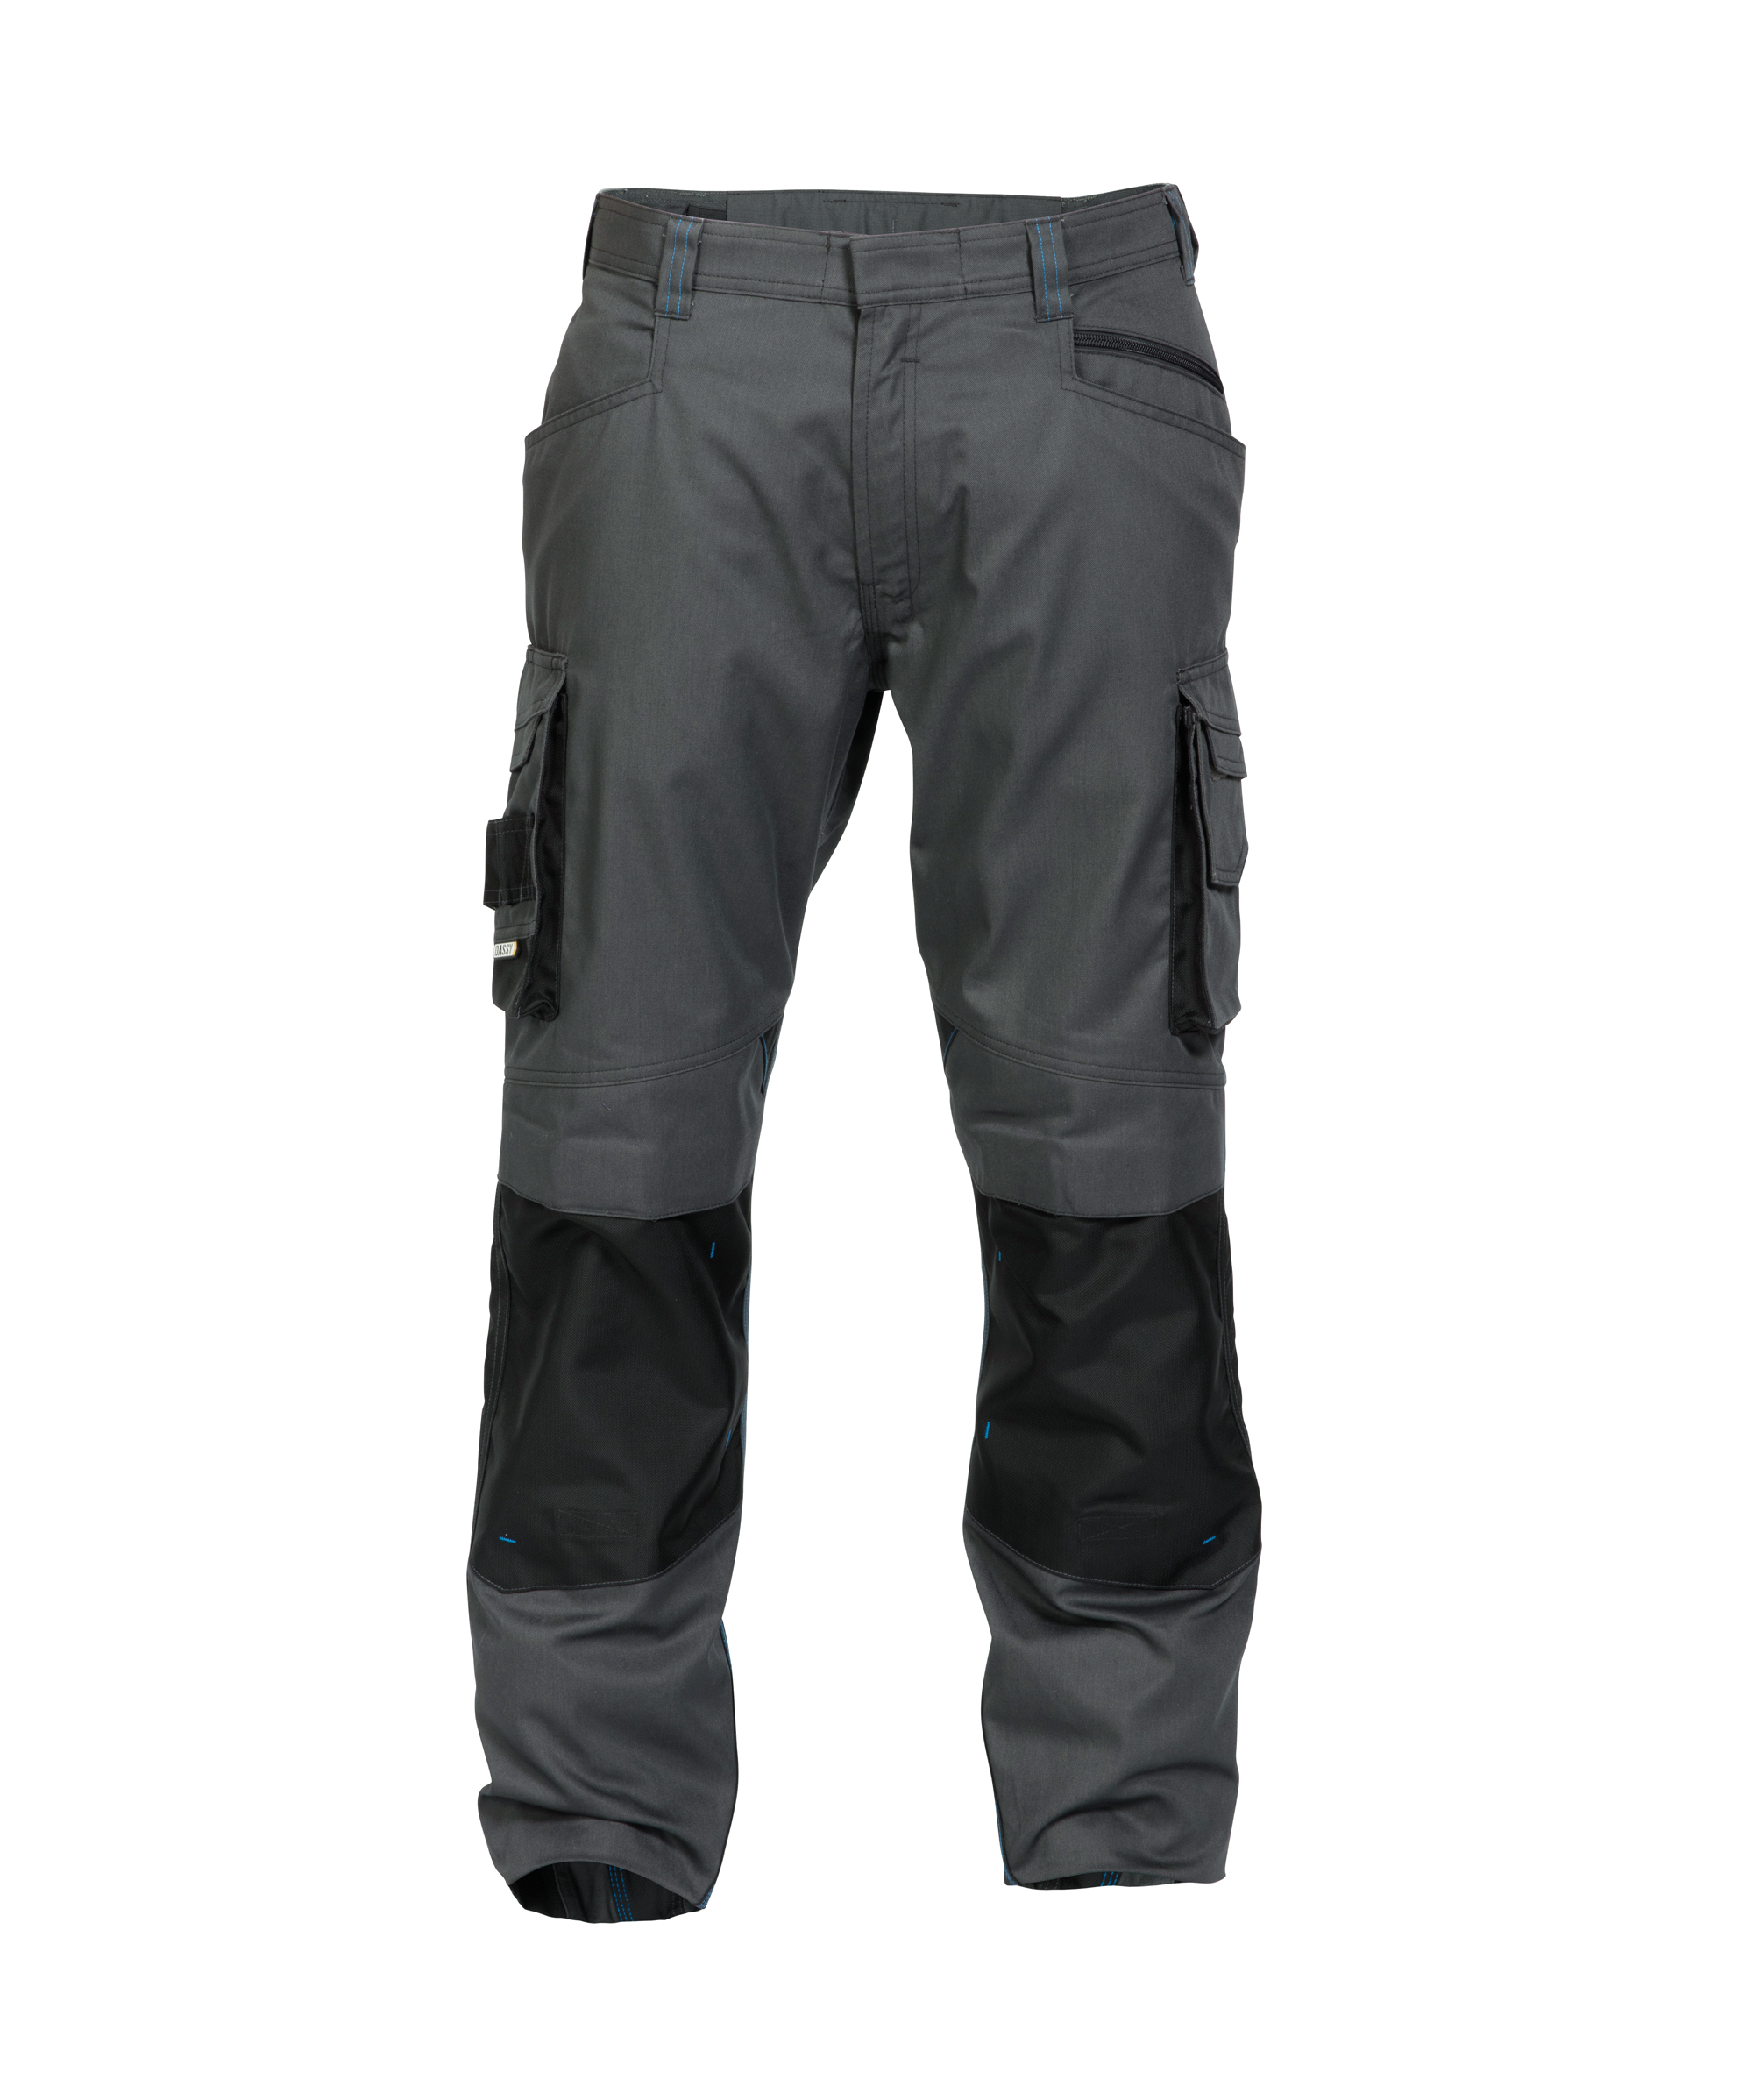 nova_two-tone-work-trousers-with-knee-pockets_anthracite-grey-black_front.jpg